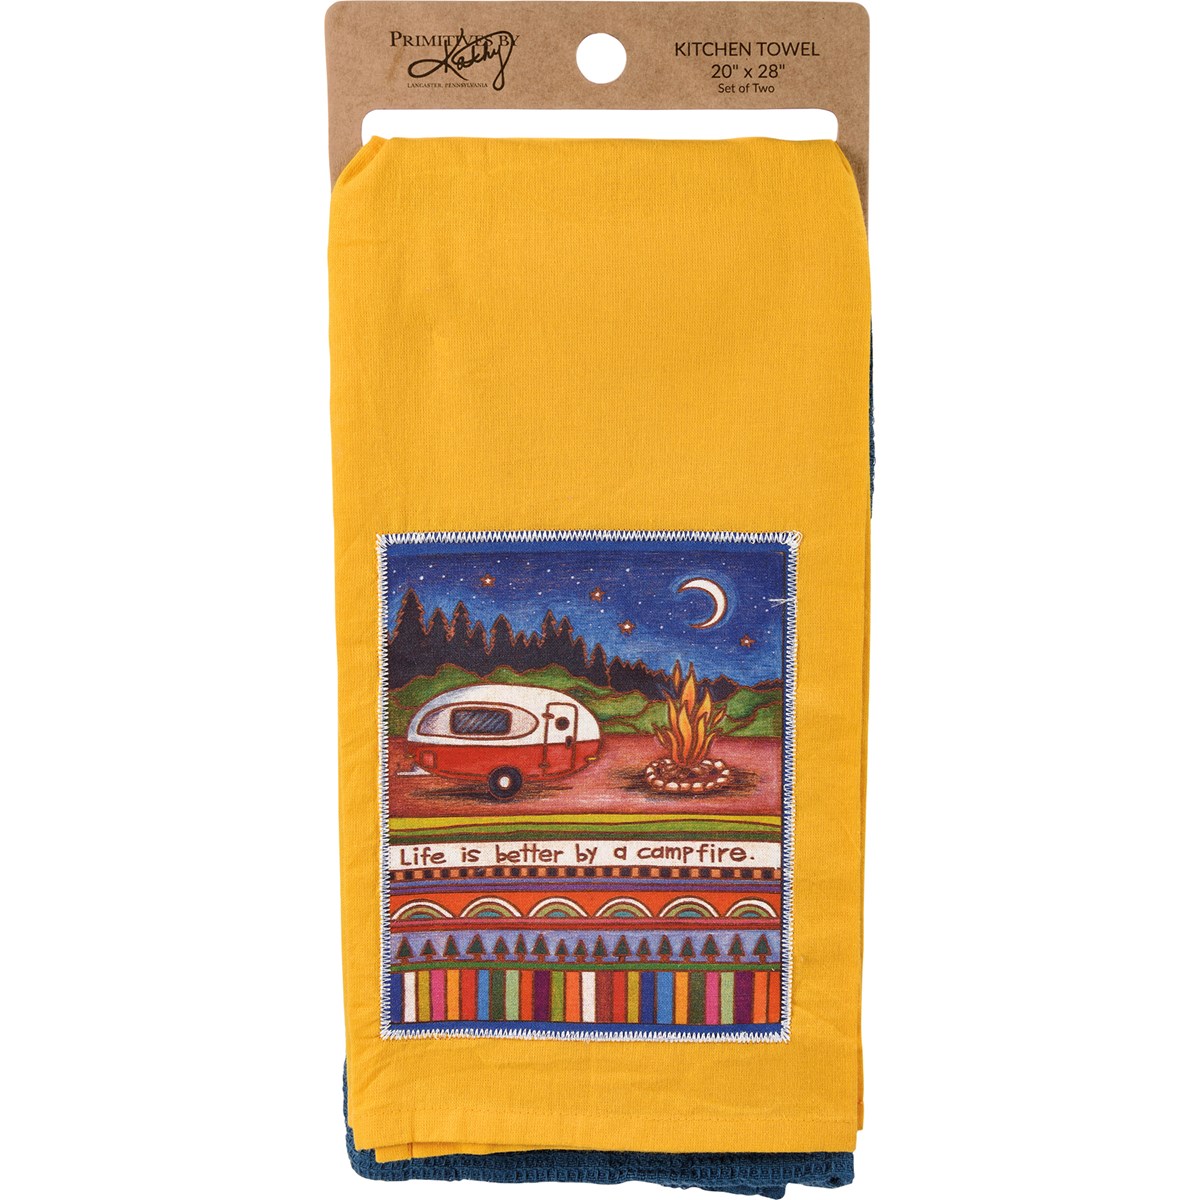 Life Is Better By A Campfire Kitchen Towel Set - Cotton